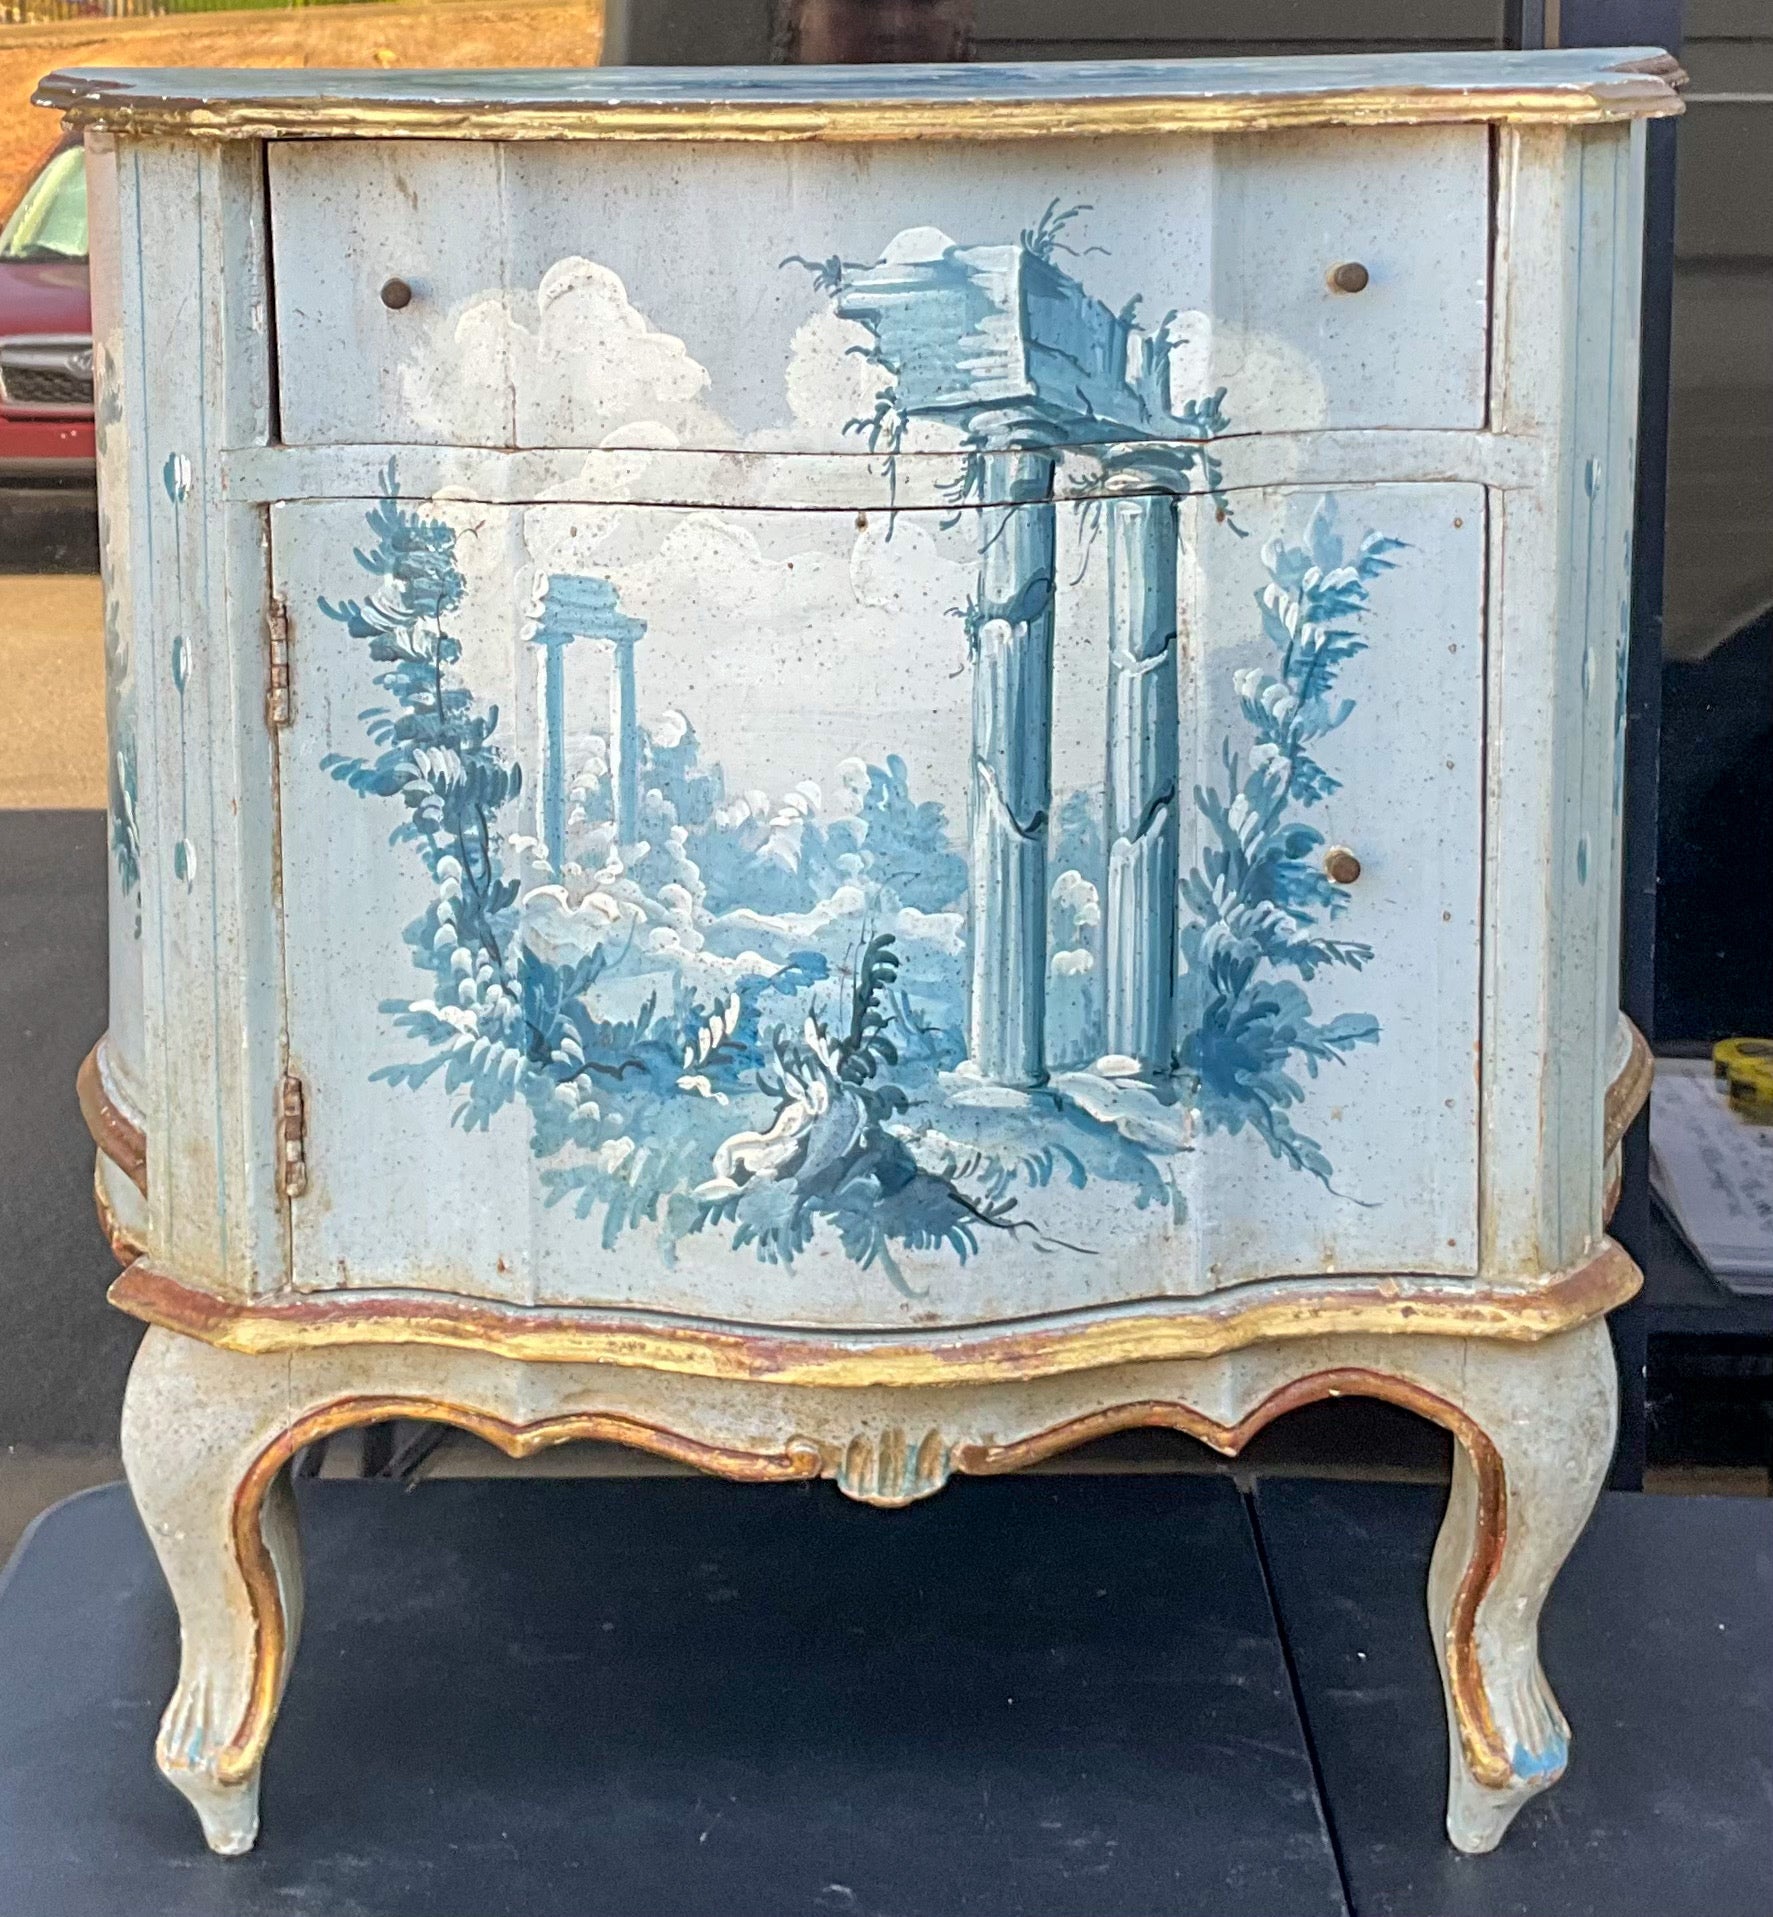 This is a lovely little Venetian commode. It is hand painted with Italian Neo-classical scenes in soft blues and gilt. It is a single drawer over open door. Age wear throughout the piece. It most likely dates to the 50s.